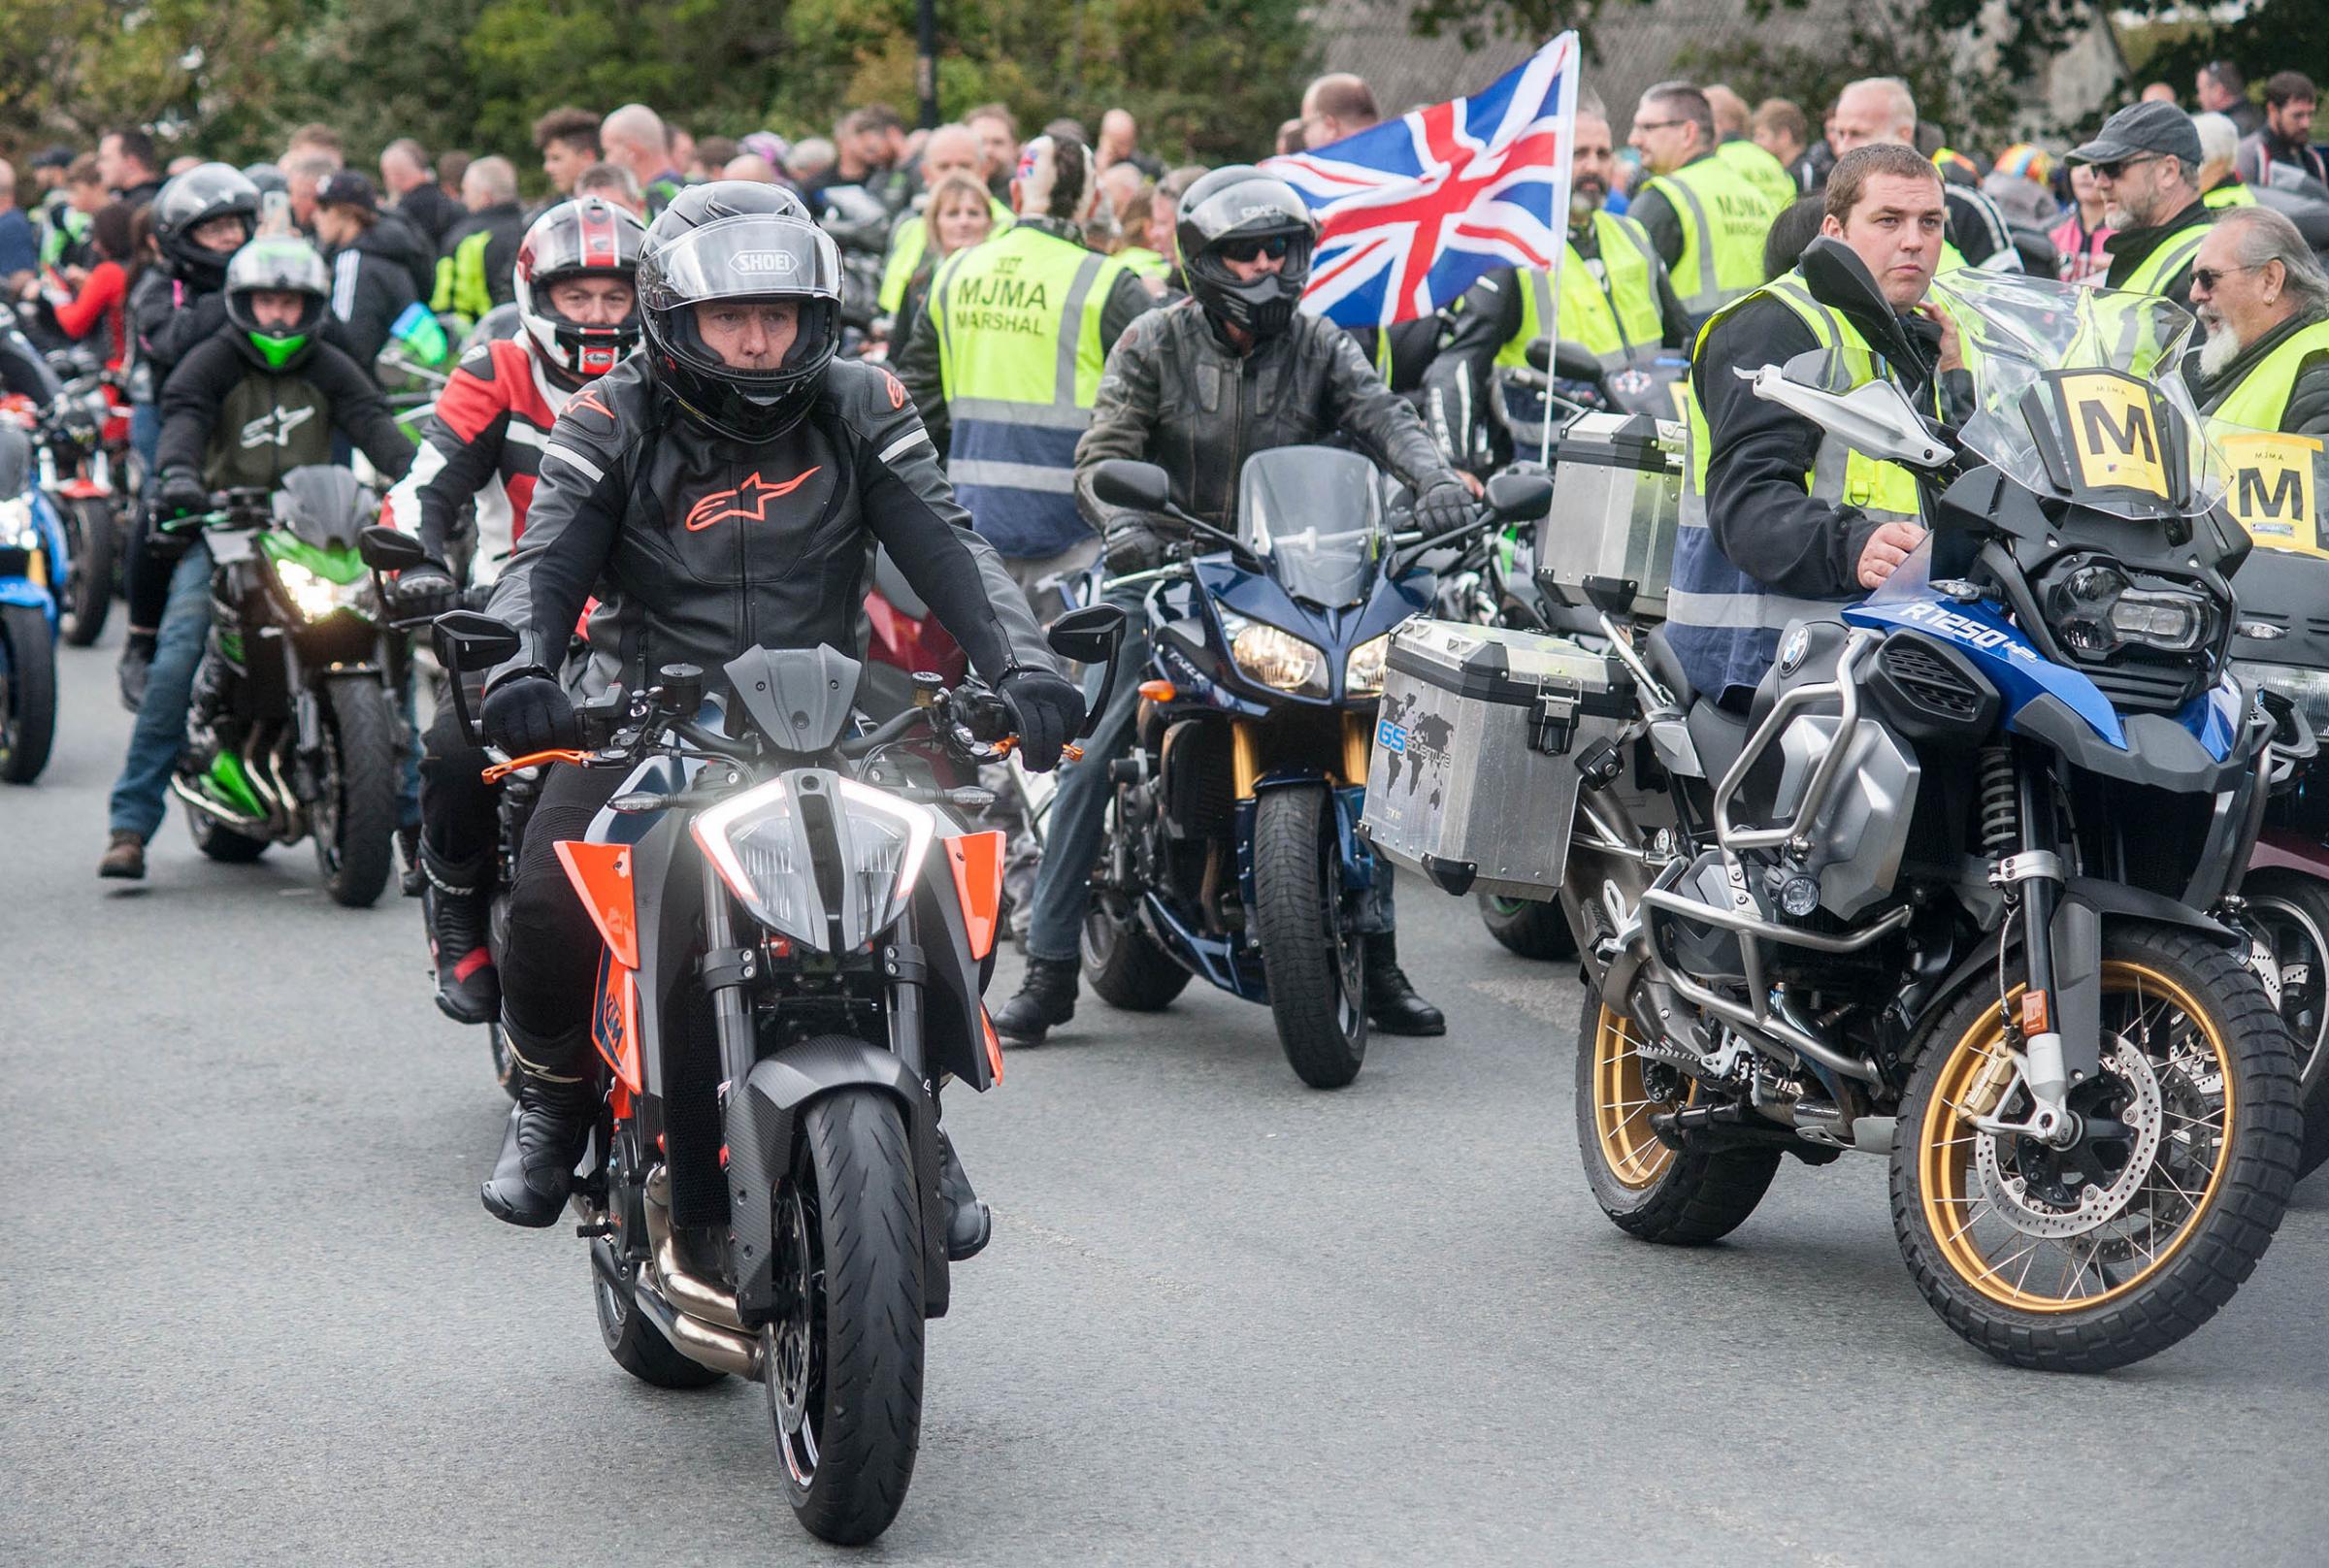 The 2022 Martin Jennings Memorial motorcycle run: Over one thousand riders congregate in Beacon Square where a minutes silence was held in memory of Martin Jennings, on Sunday afternoon. Picture by Colin Higgs